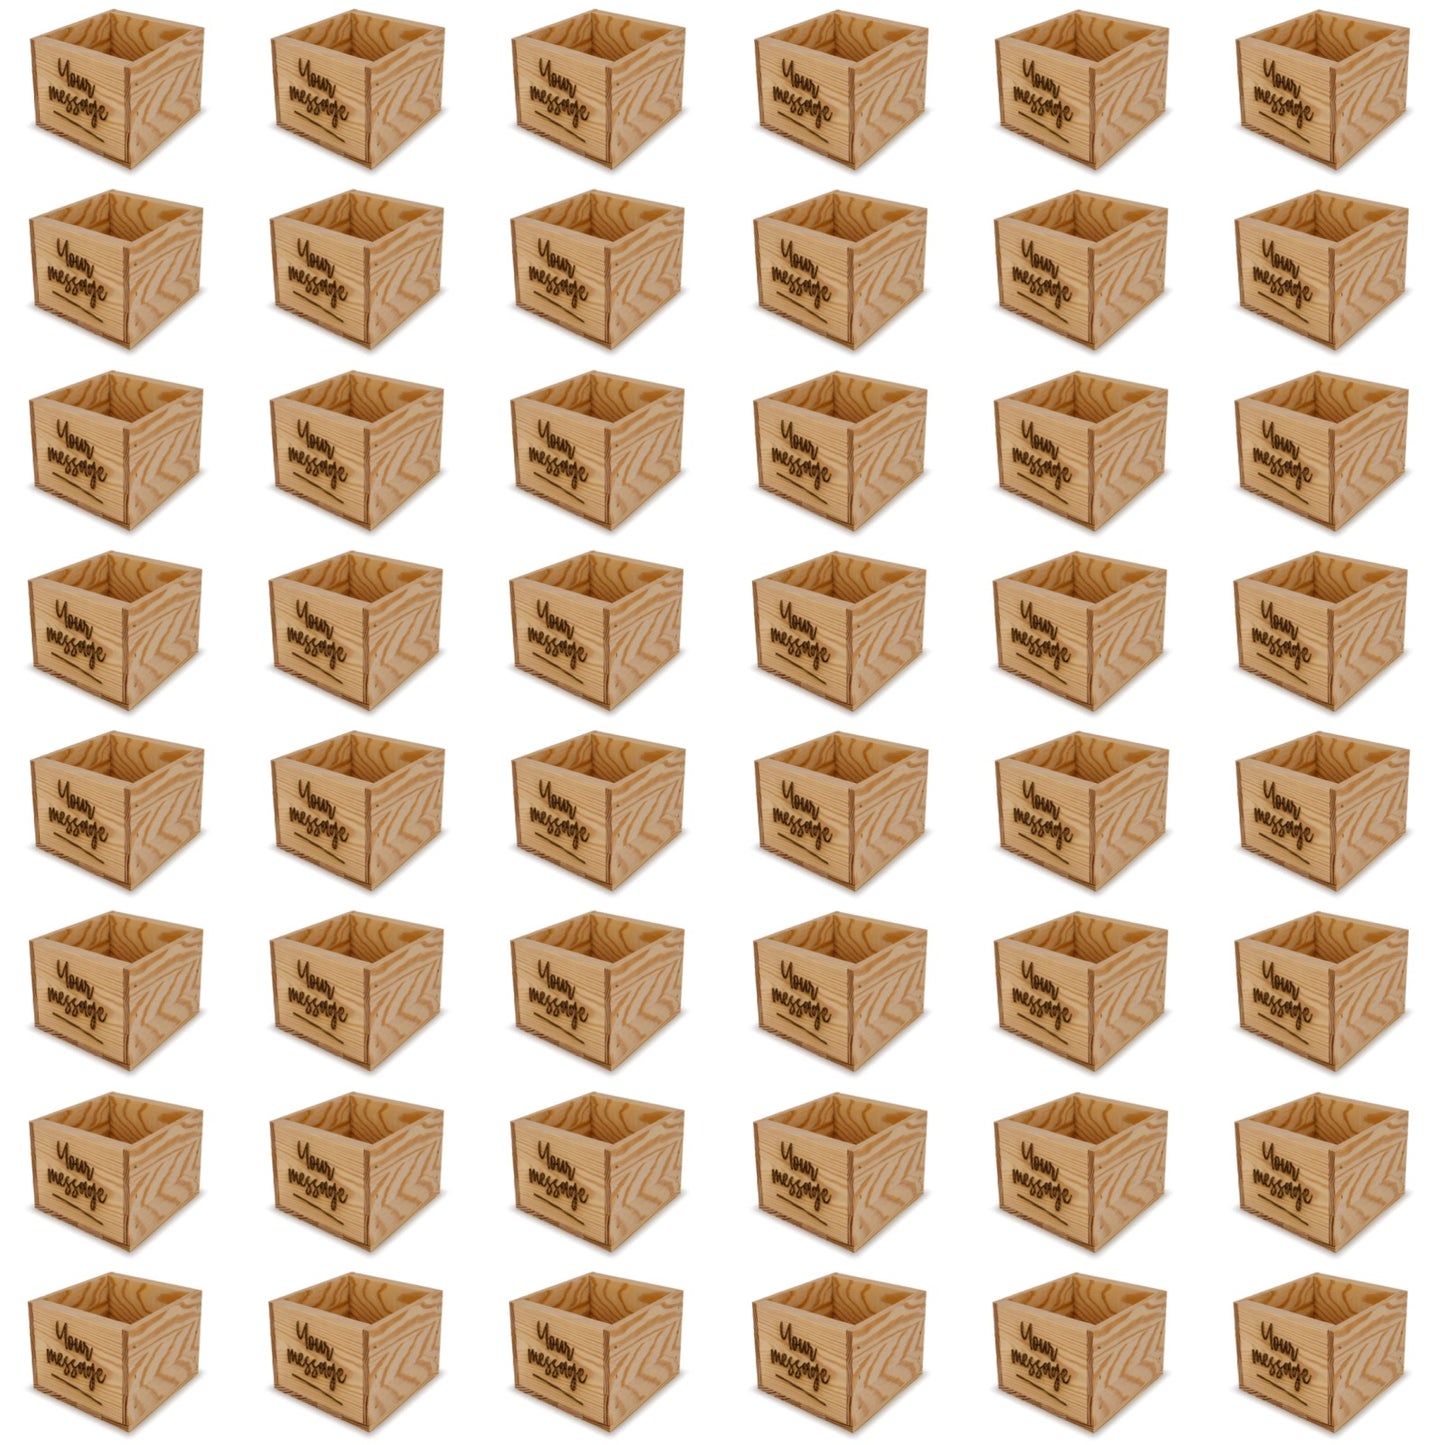 48 Small wooden crates with custom message 6x6.25x5.25